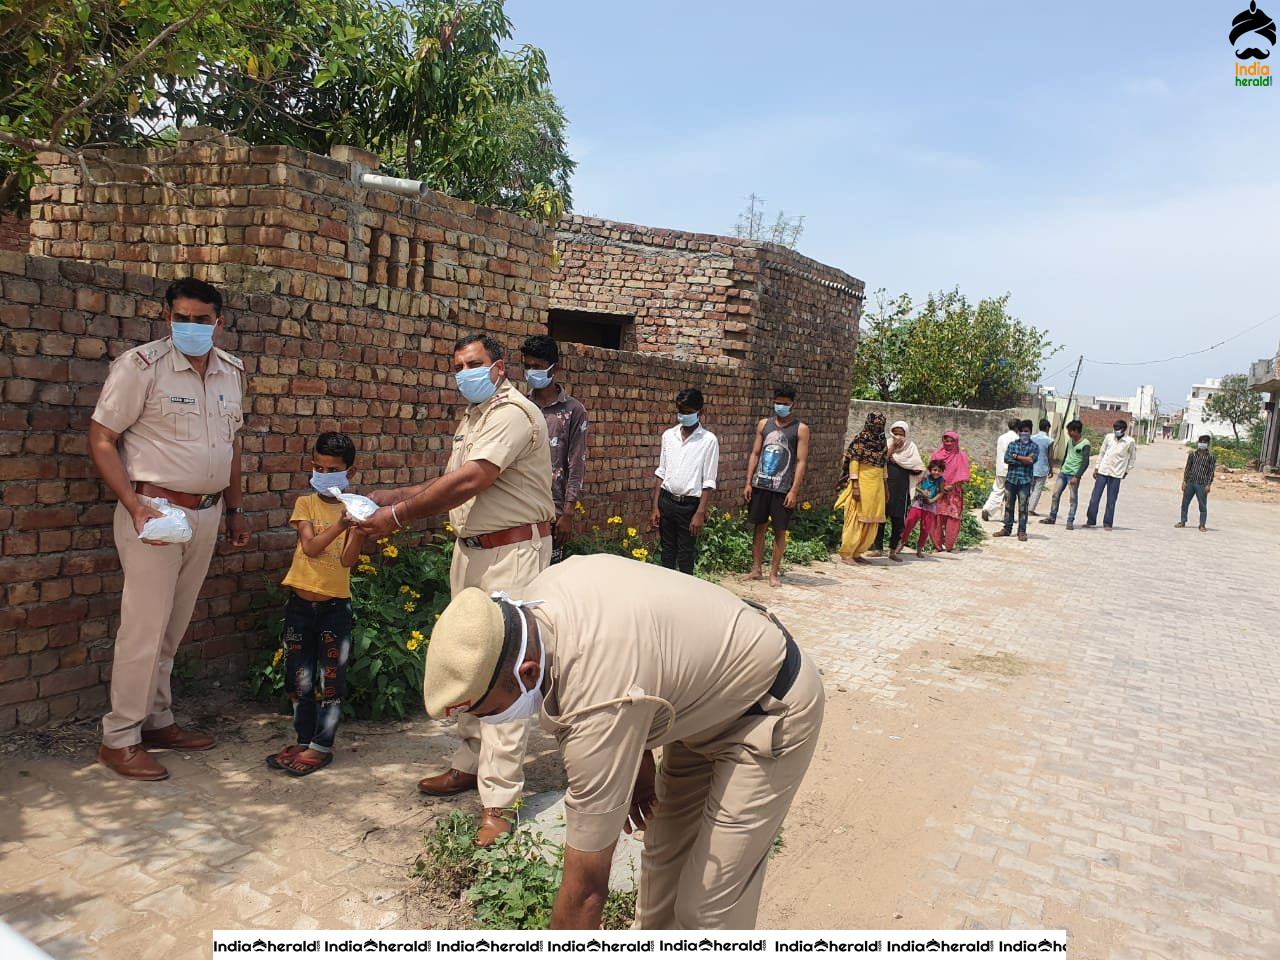 Personnel of Haryana Police distributed food among the needy amid the COVID 19 Lockdown